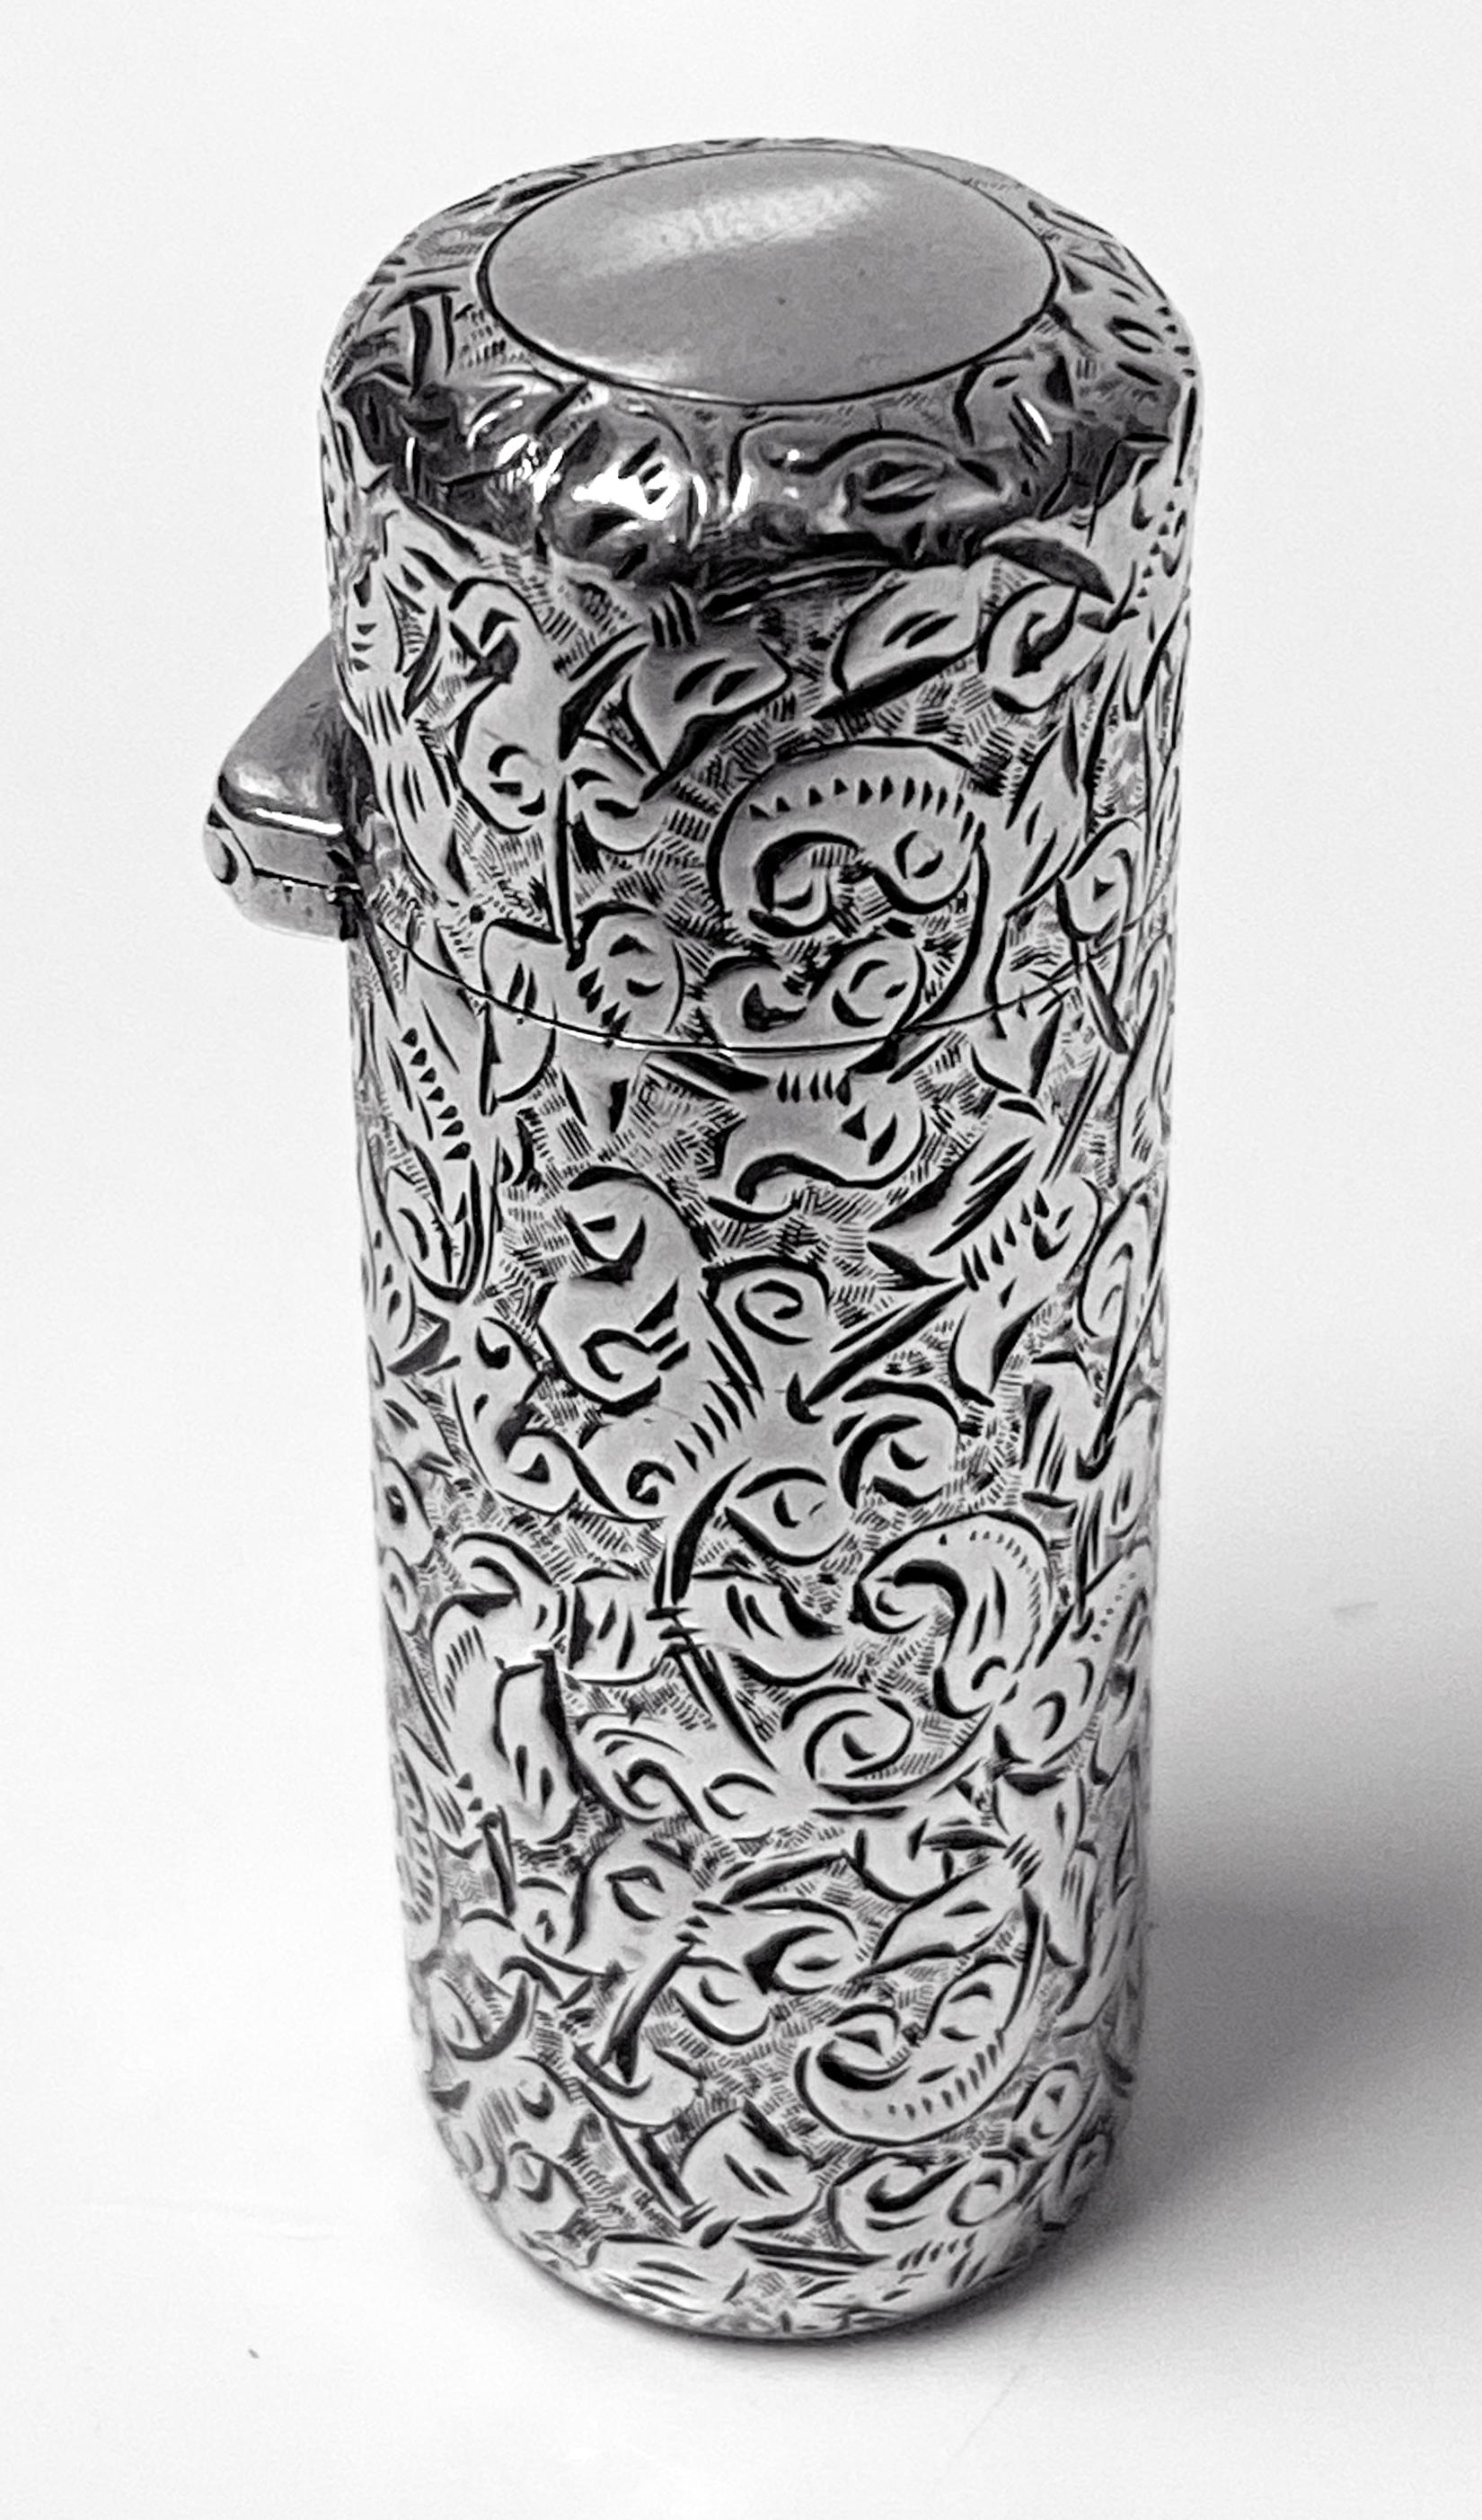 Sampson Mordan silver scent perfume bottle, London, 1888. Cylinder shaped, silver scent bottle, with a hinged top, vacant cartouche, no monograms, glass liner and glass stopper. The bottle is finely engraved with swirling scrollwork and stylized